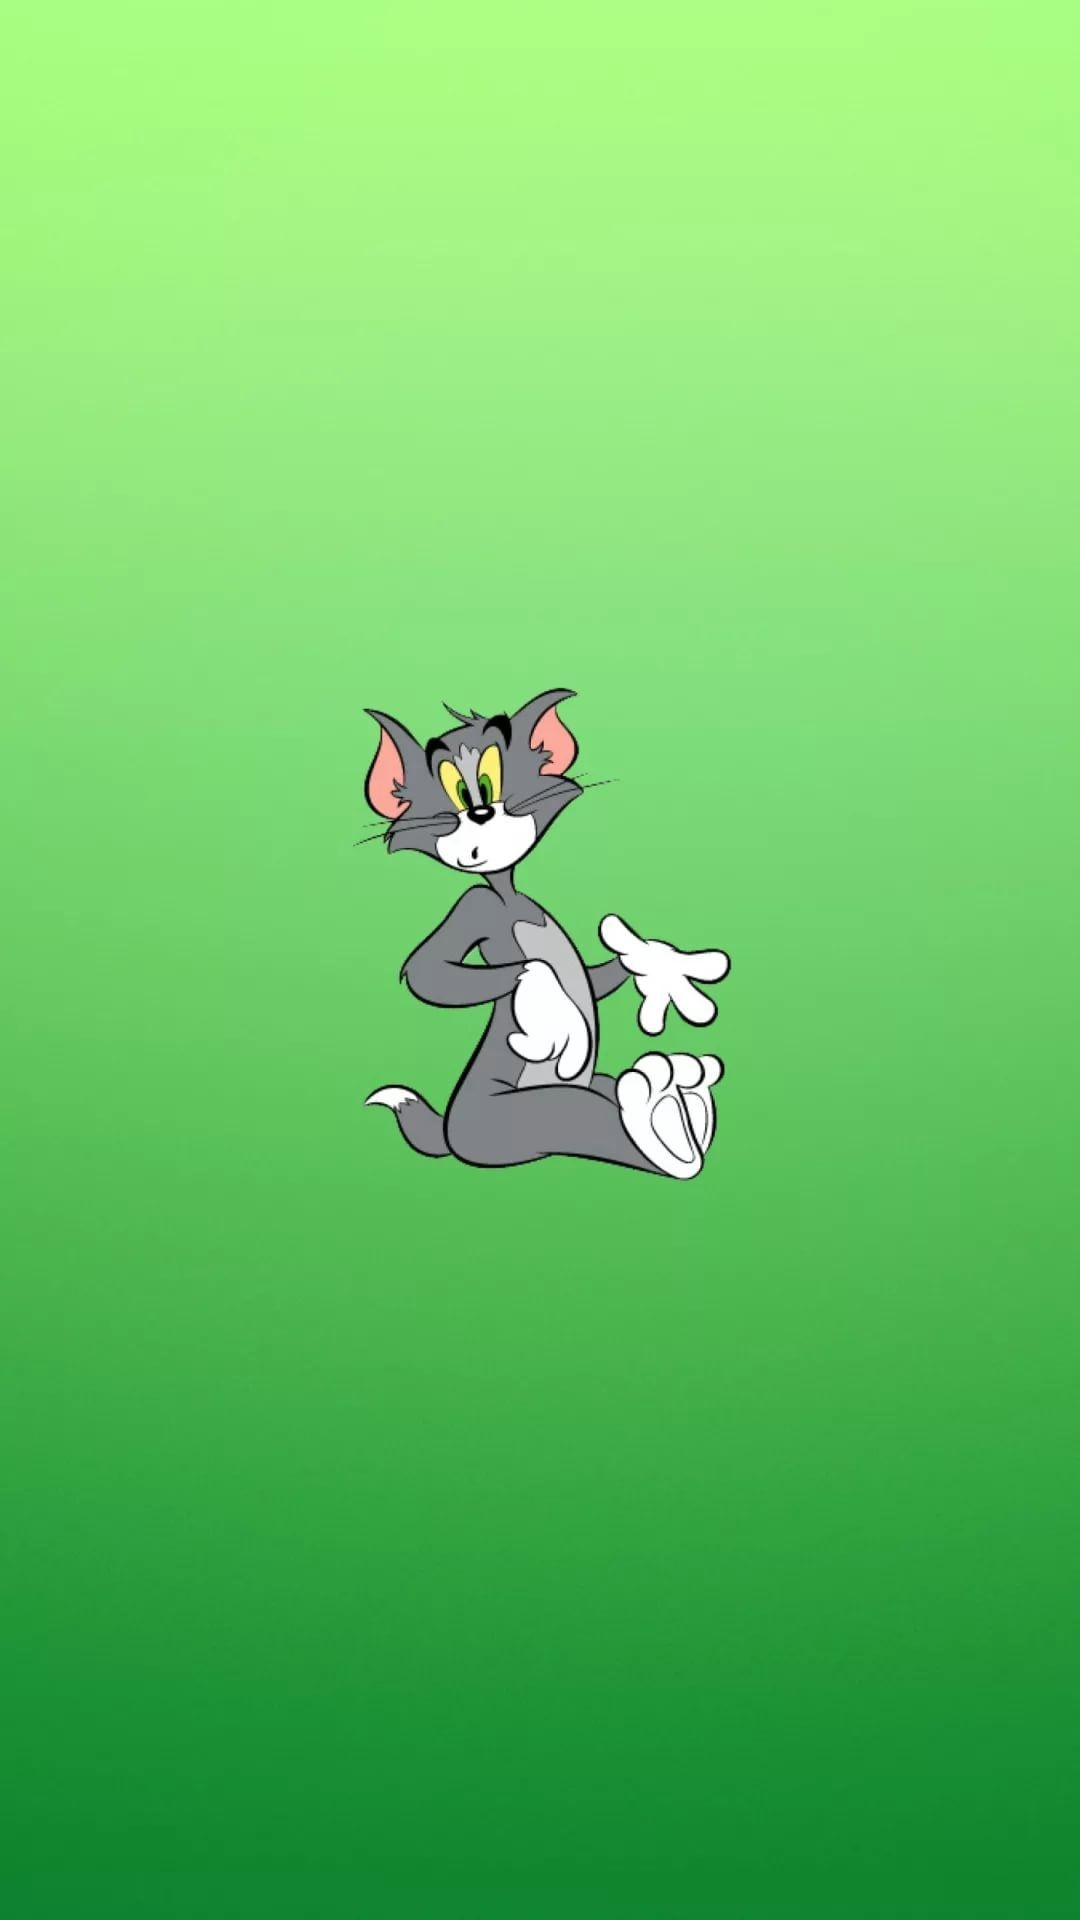 Wallpaper Tom Cat with image resolution 1080x1920 pixel. You can make this wallpaper for your iPhone 5, 6, 7, 8, X backgrounds, Mobile Screensaver, or iPad Lock Screen - Tom and Jerry